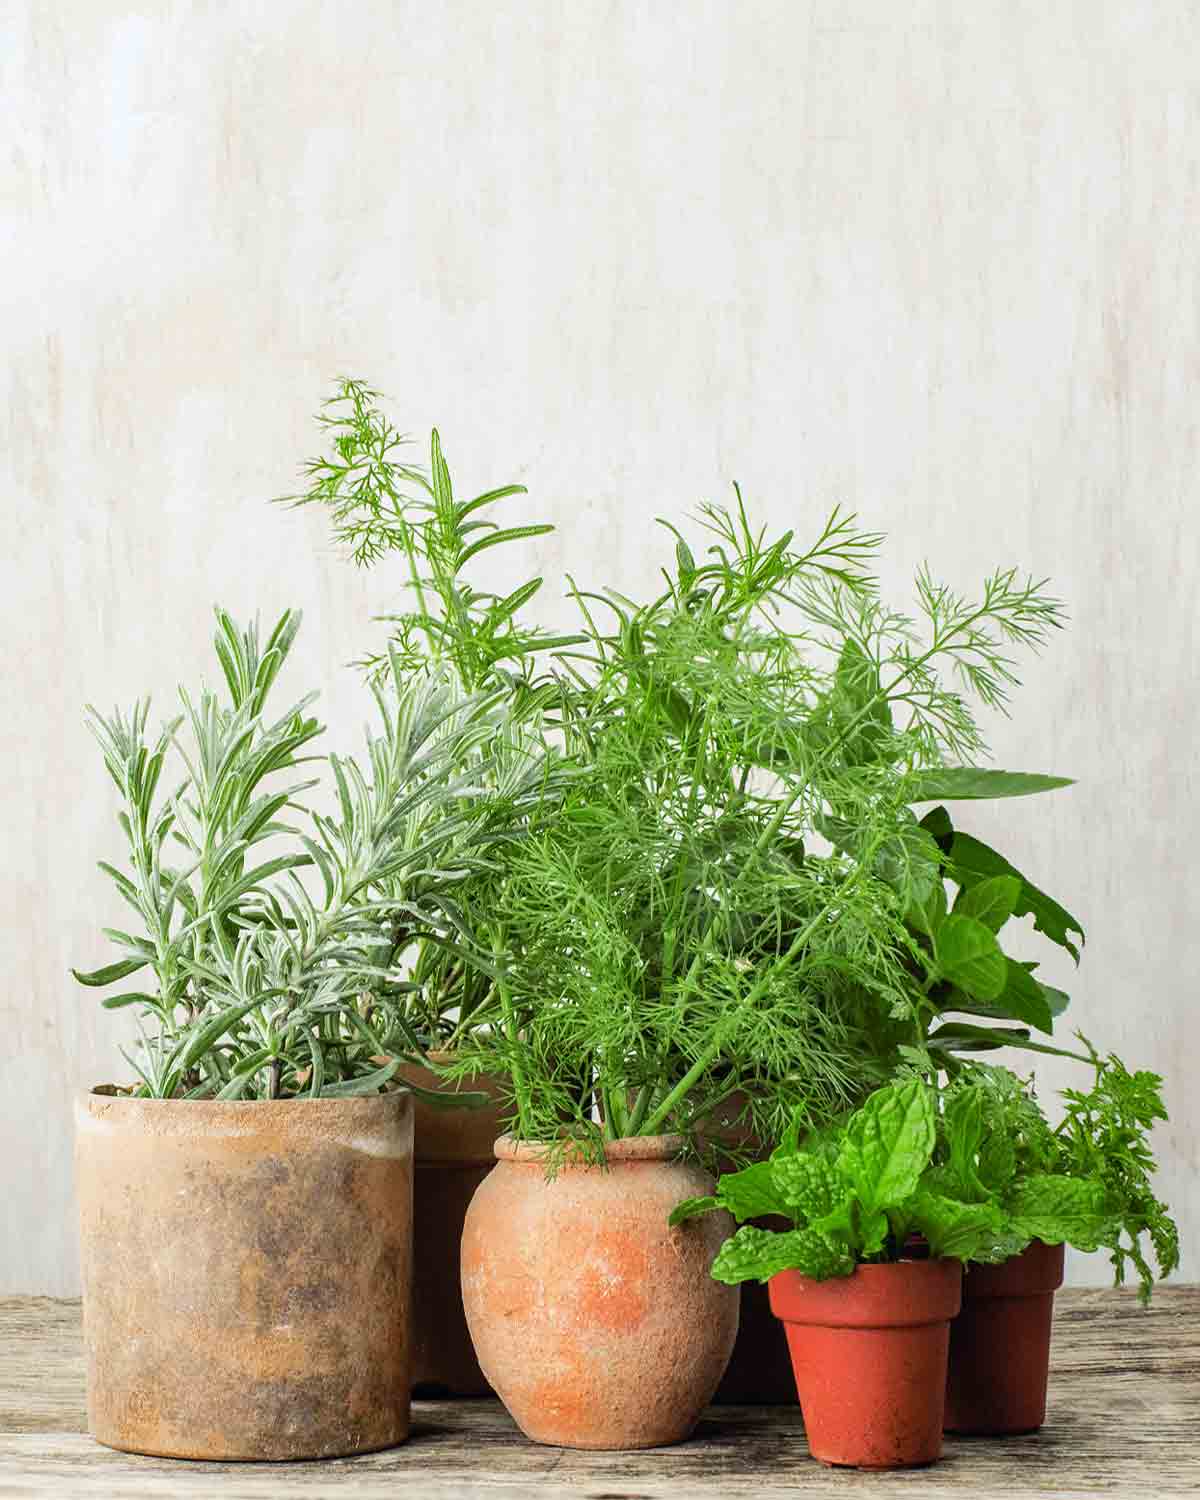 A collection of herbs in containers